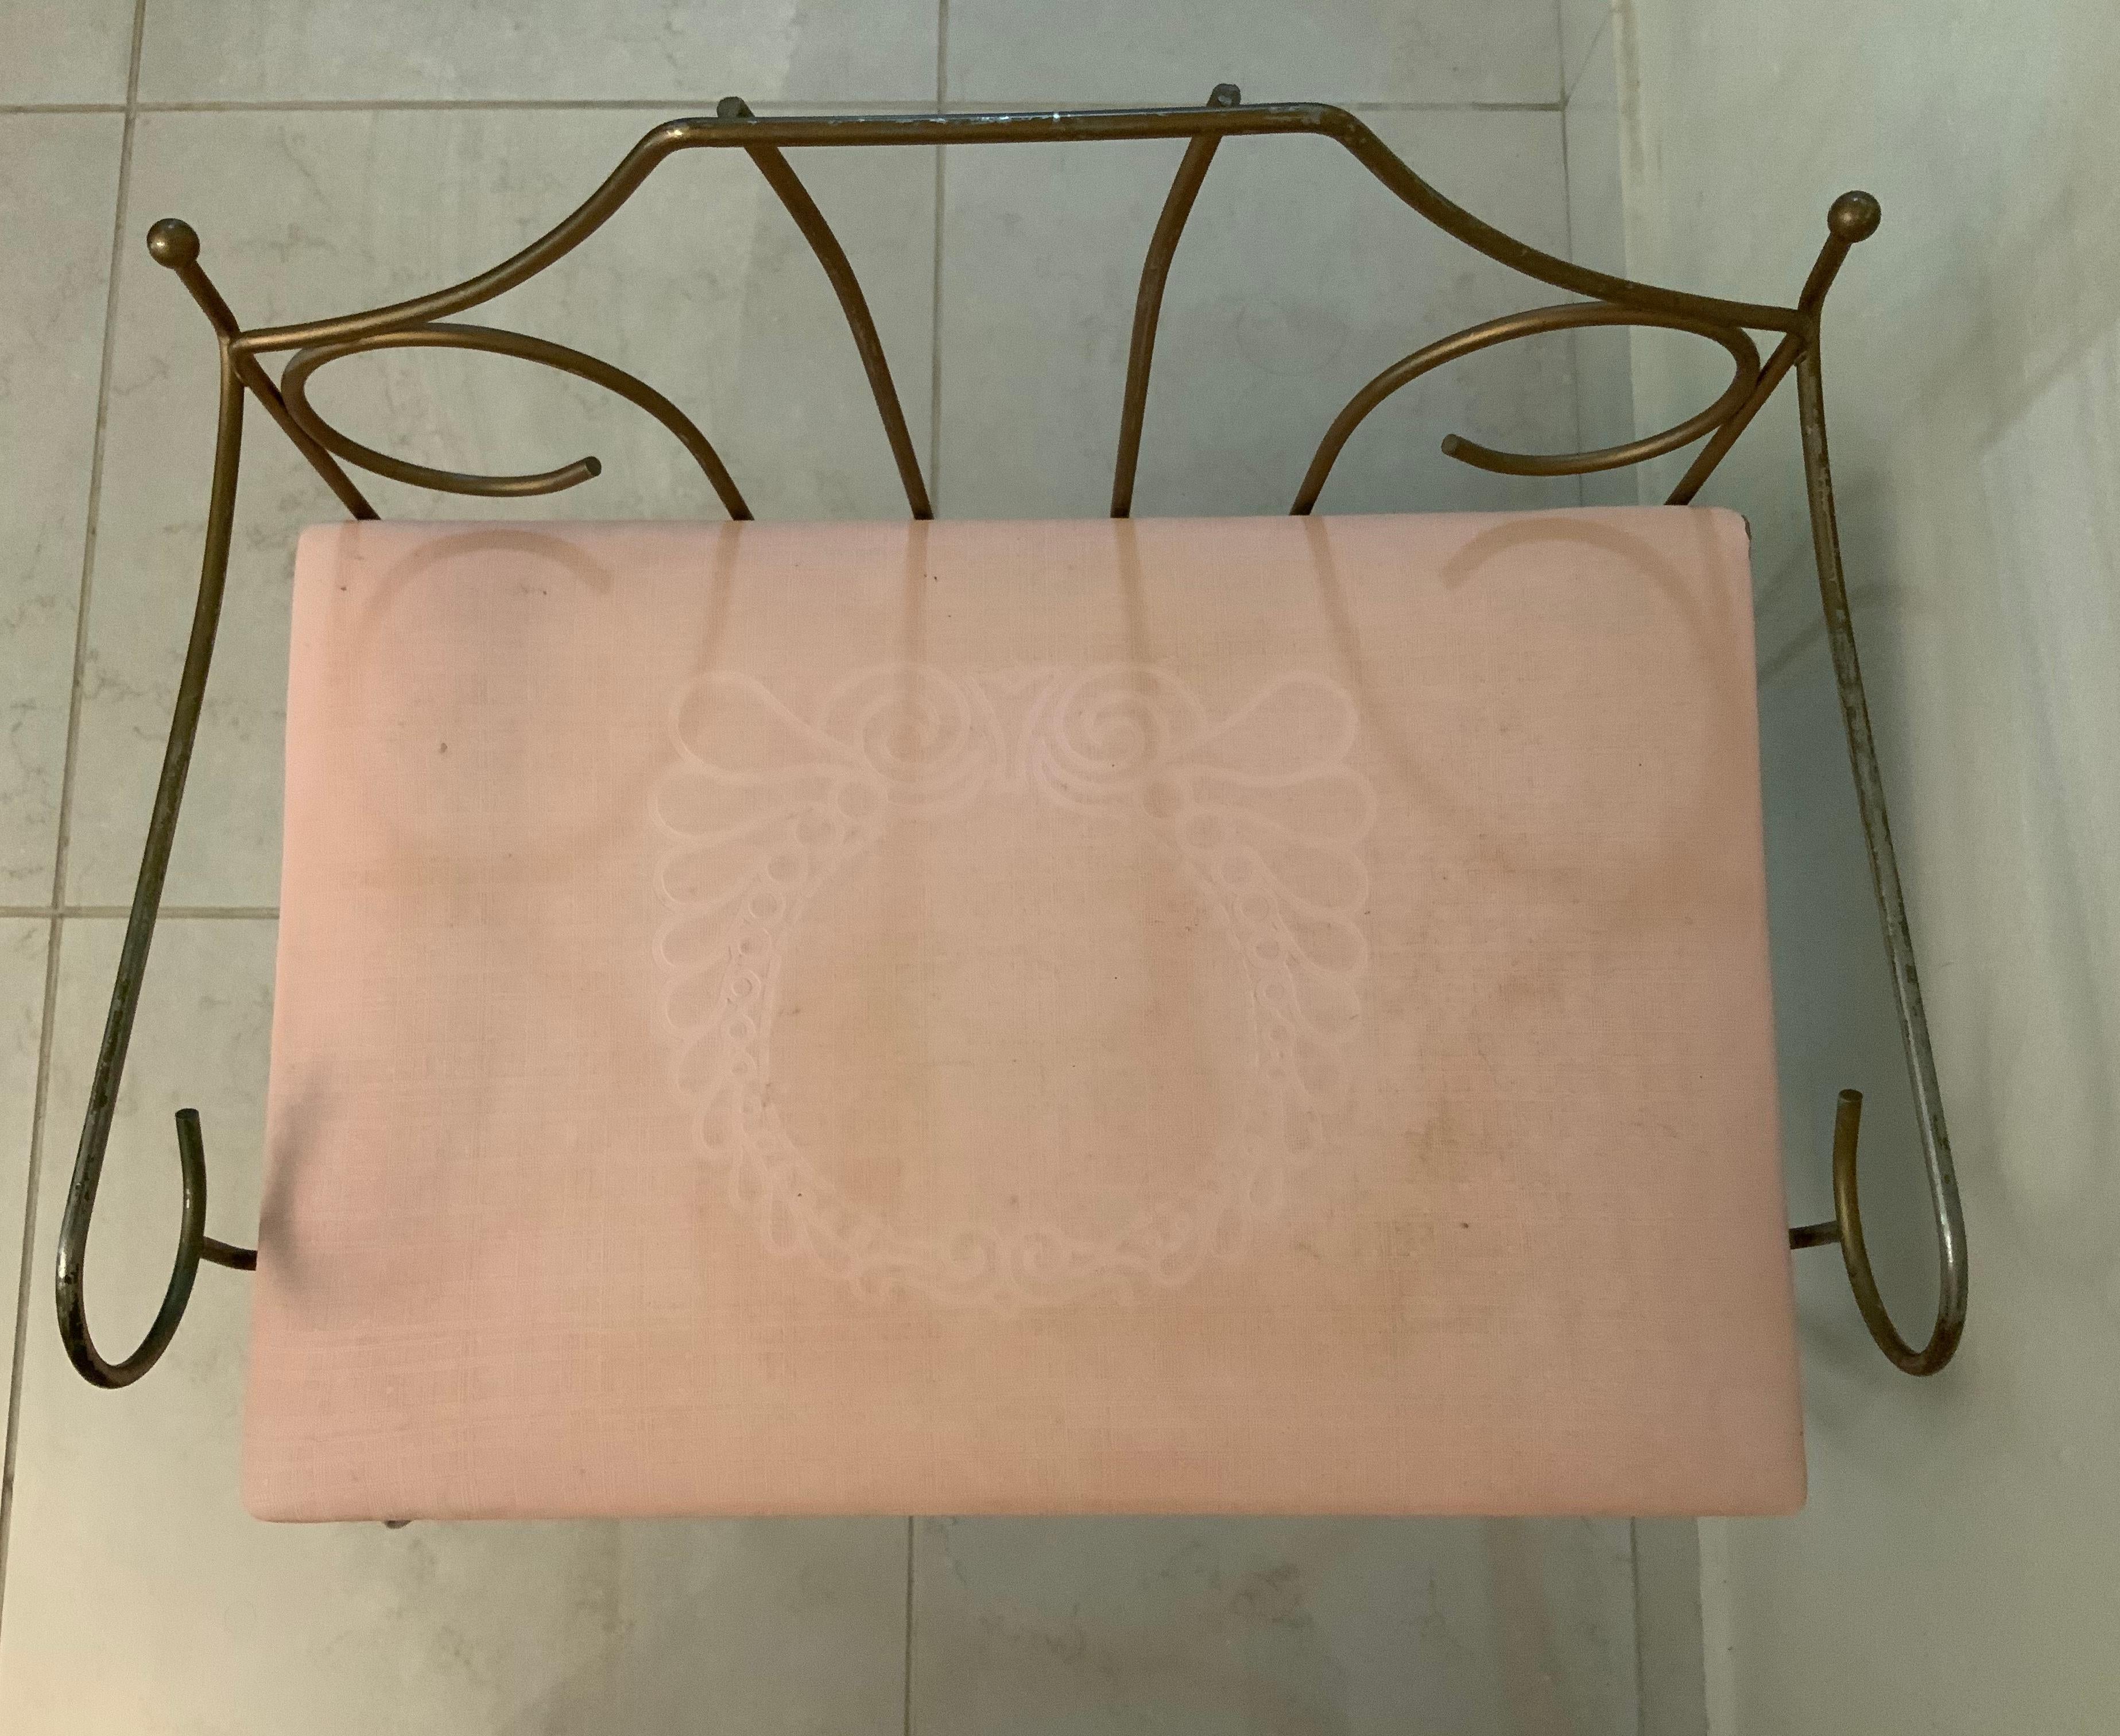 This is a gold tone metal vanity rectangular bench/stool. It has a pale pink vinyl seat that is adorned with a wreath. It has a pentagonal pierced metal back adorned with scrolls. It has also a scroll shaped metal arms. The bench is supported by